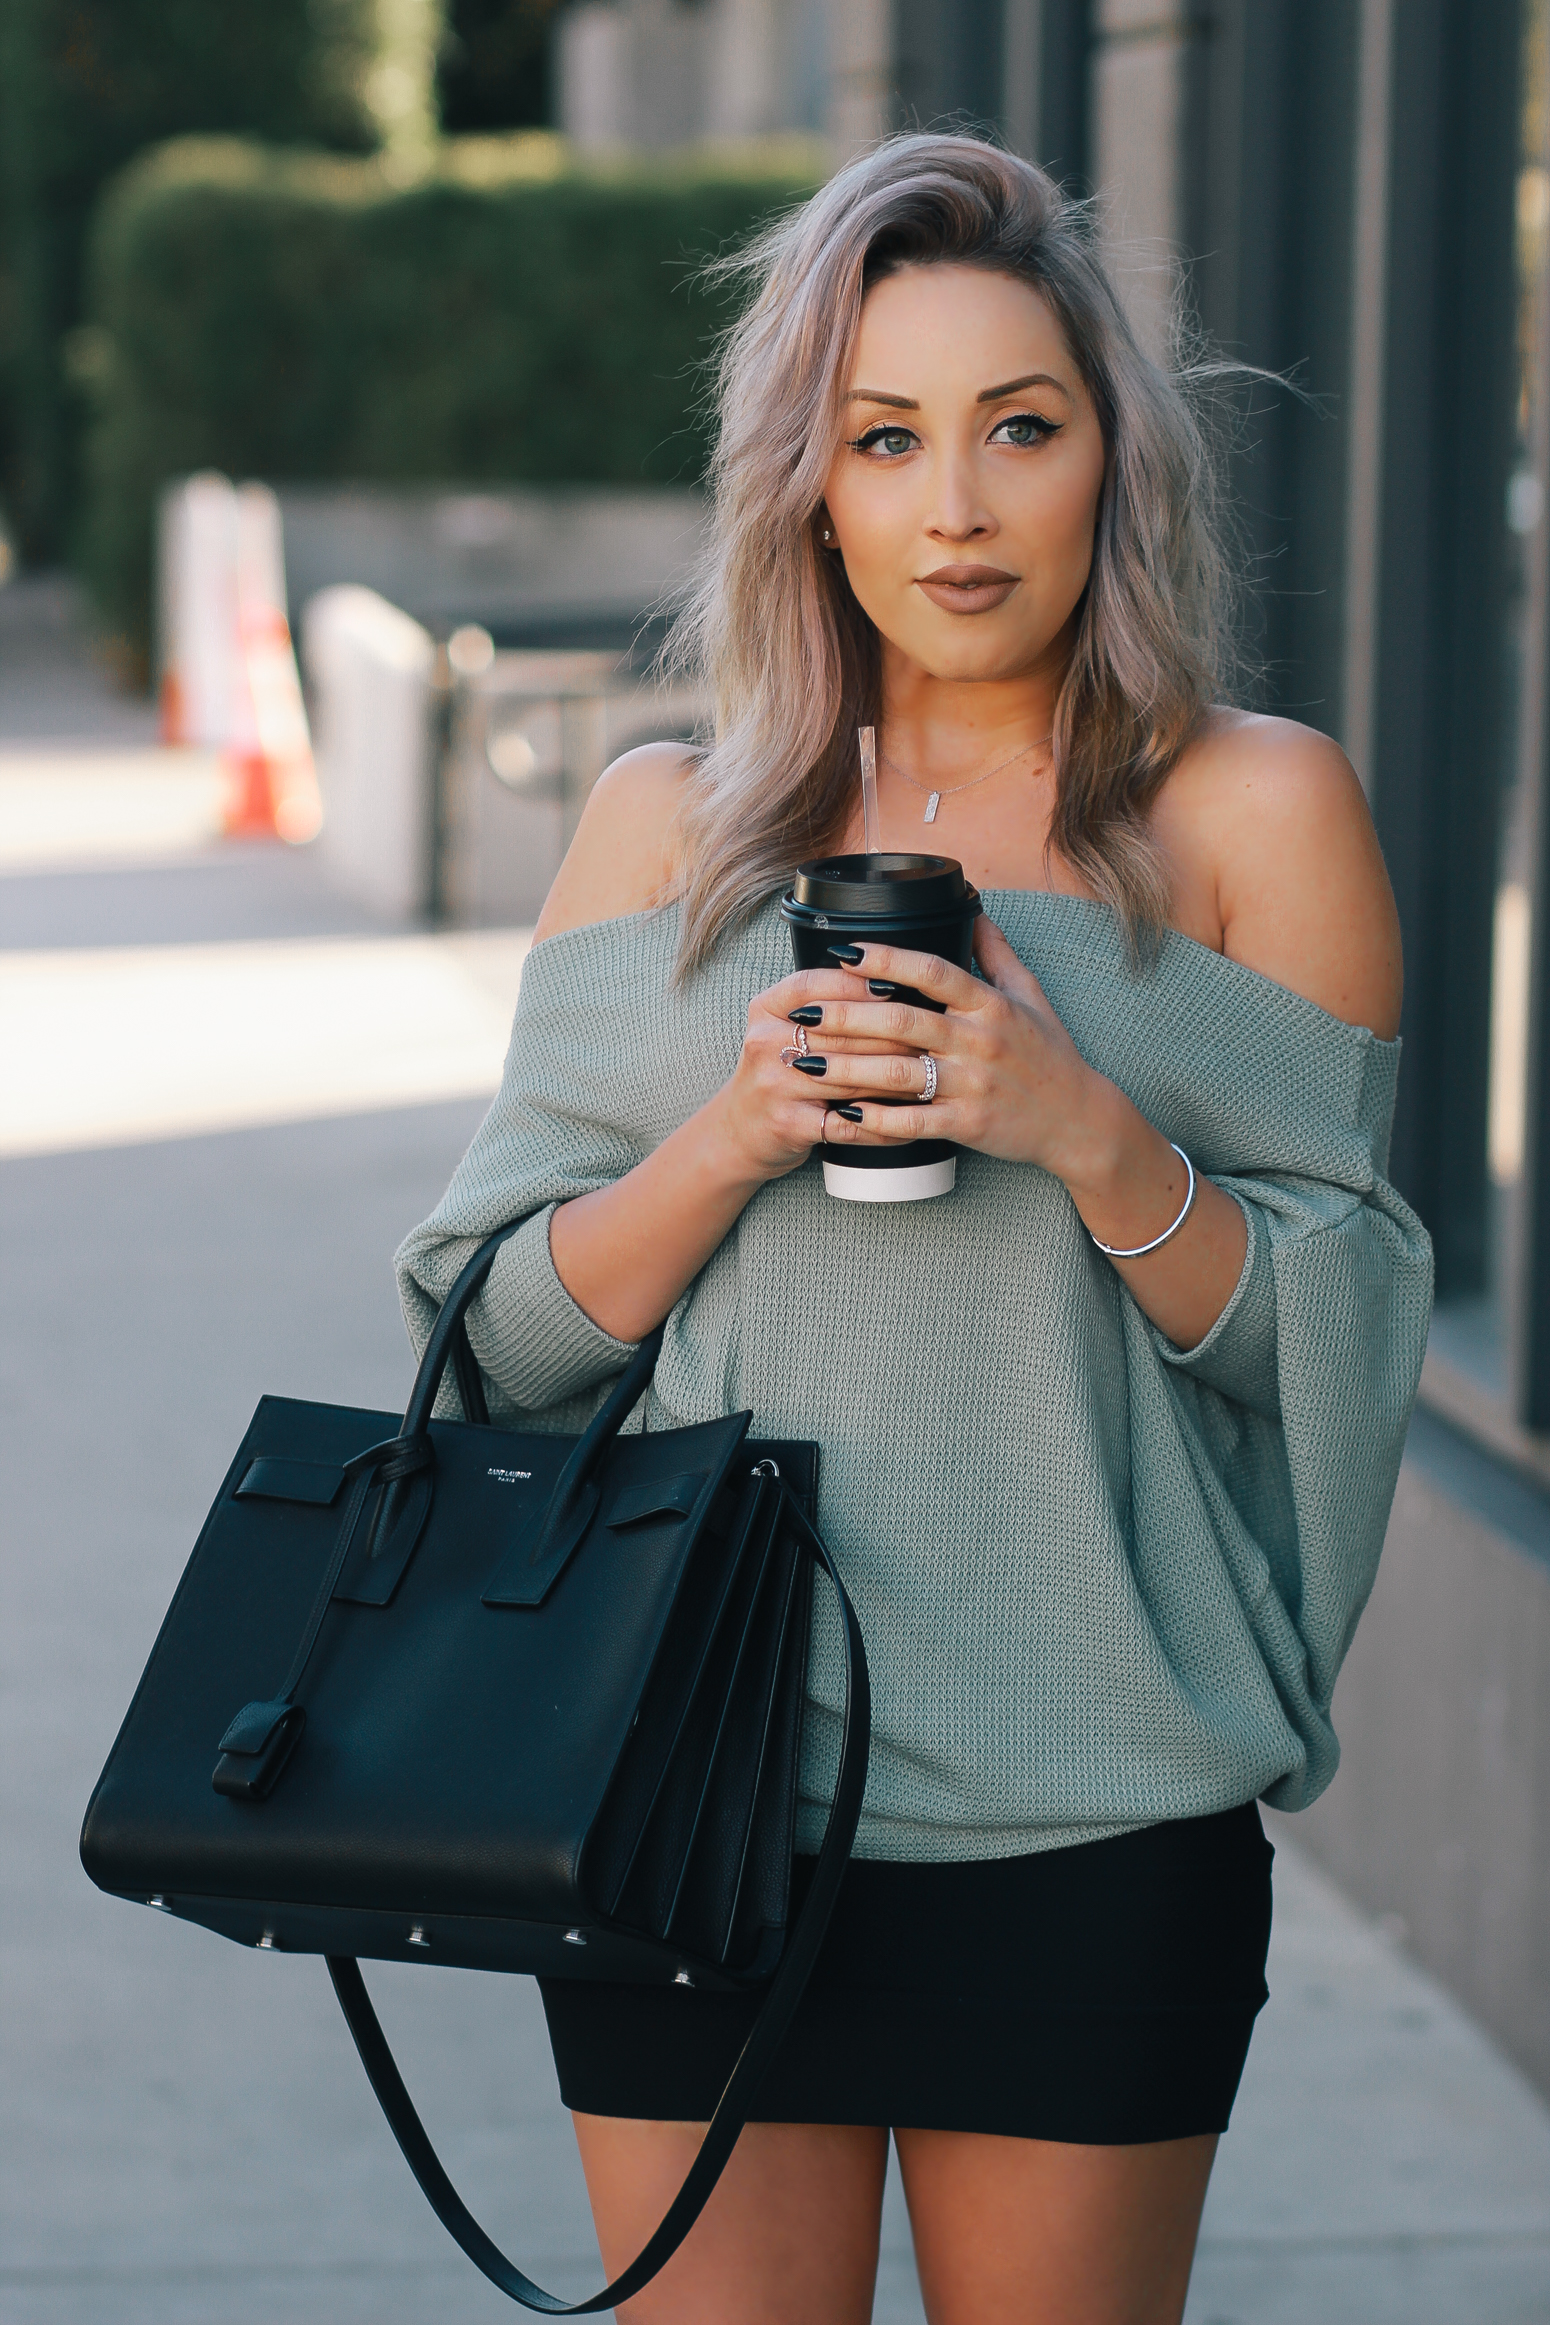 Blondie in the City | Off The Shoulder Top | YSL Bag